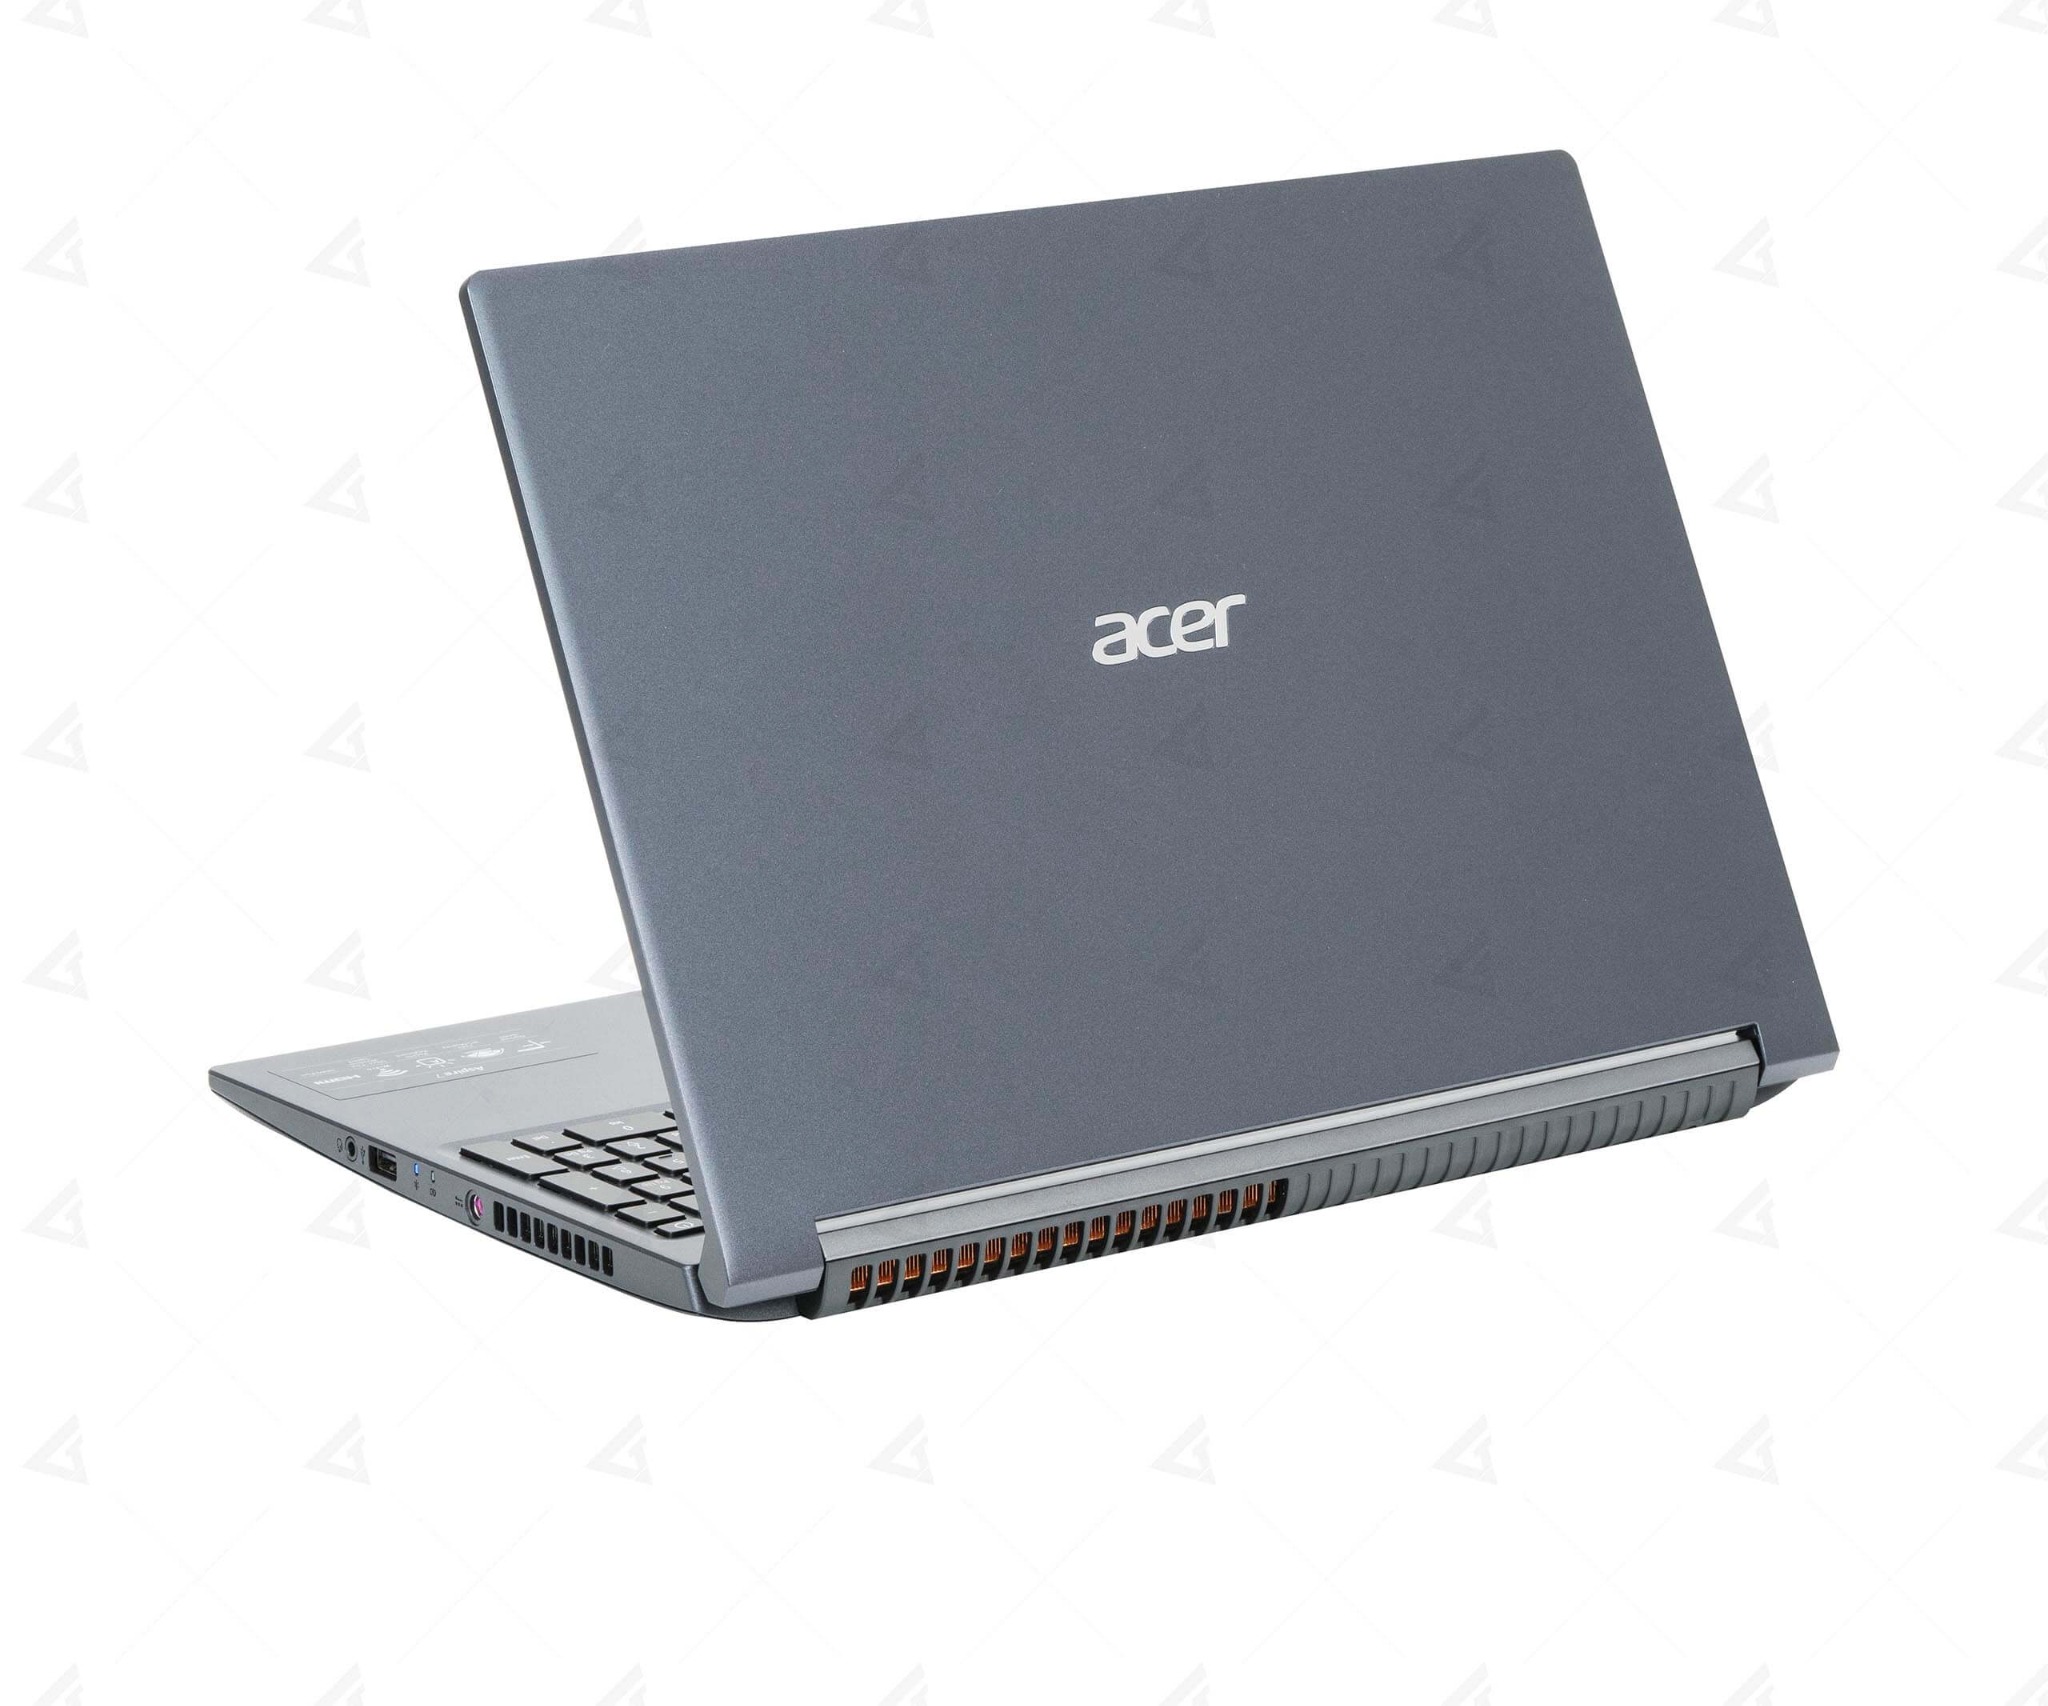 GEARVN - Laptop Gaming Acer Aspire 7 A715 42G R05G